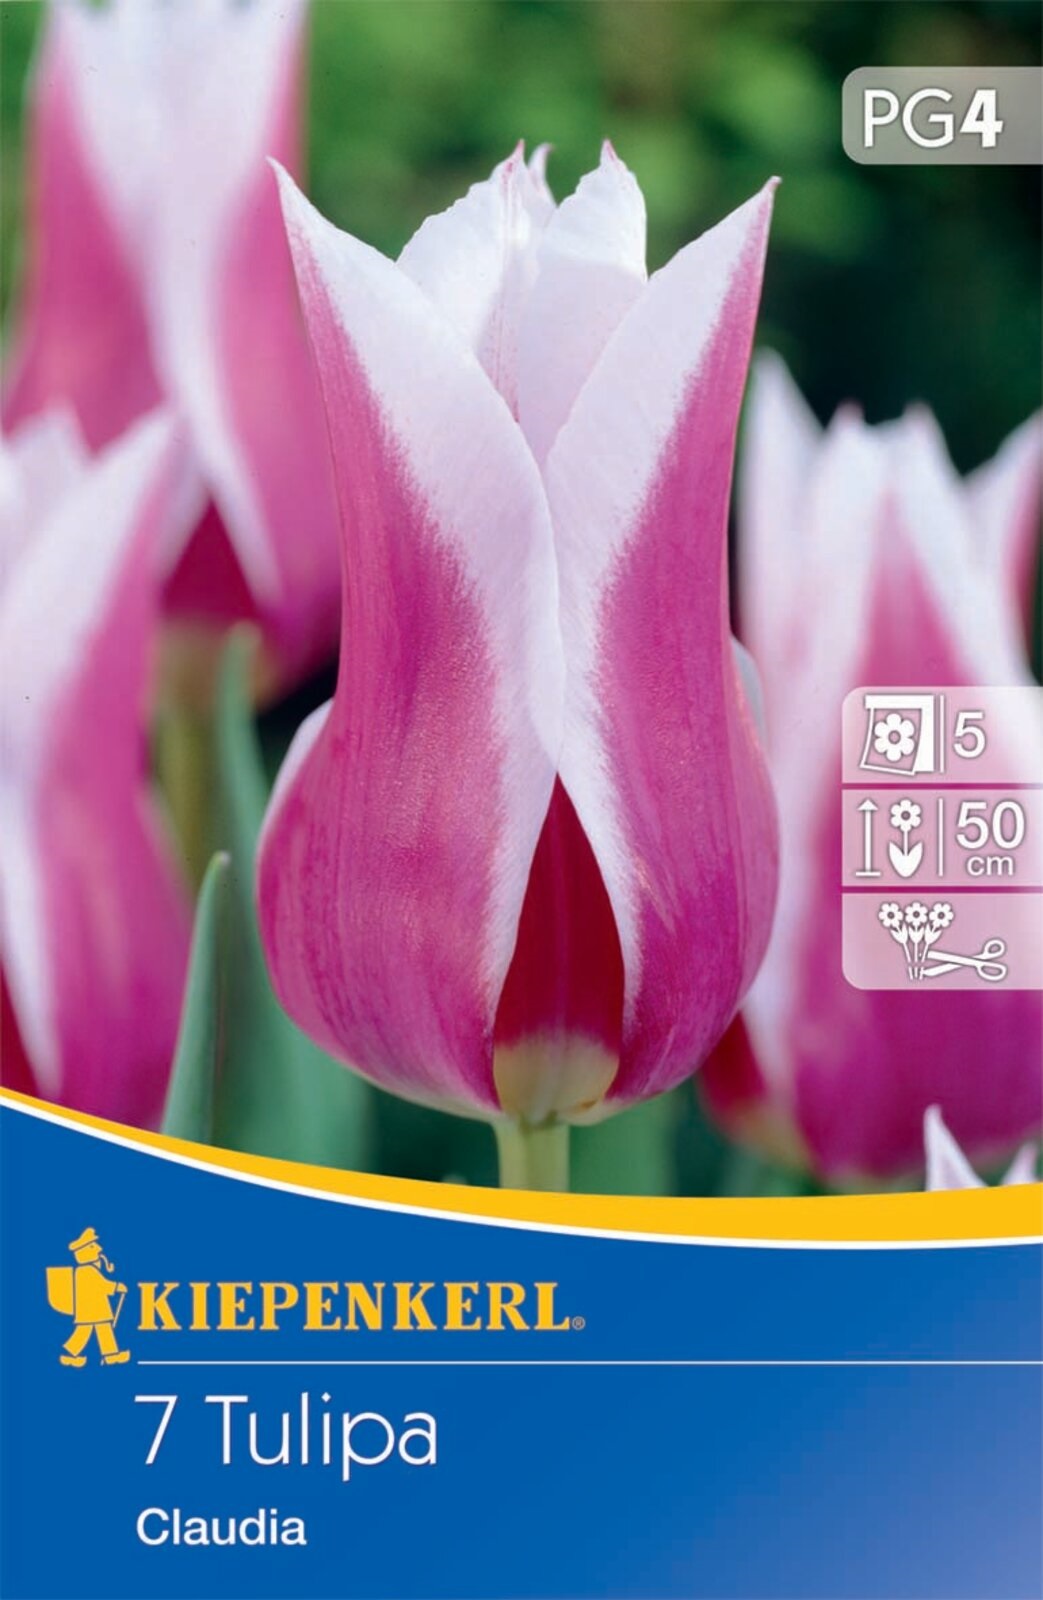 Flower bulb Tulip with lily flowers Claudia 7 pcs Kiepenkerl